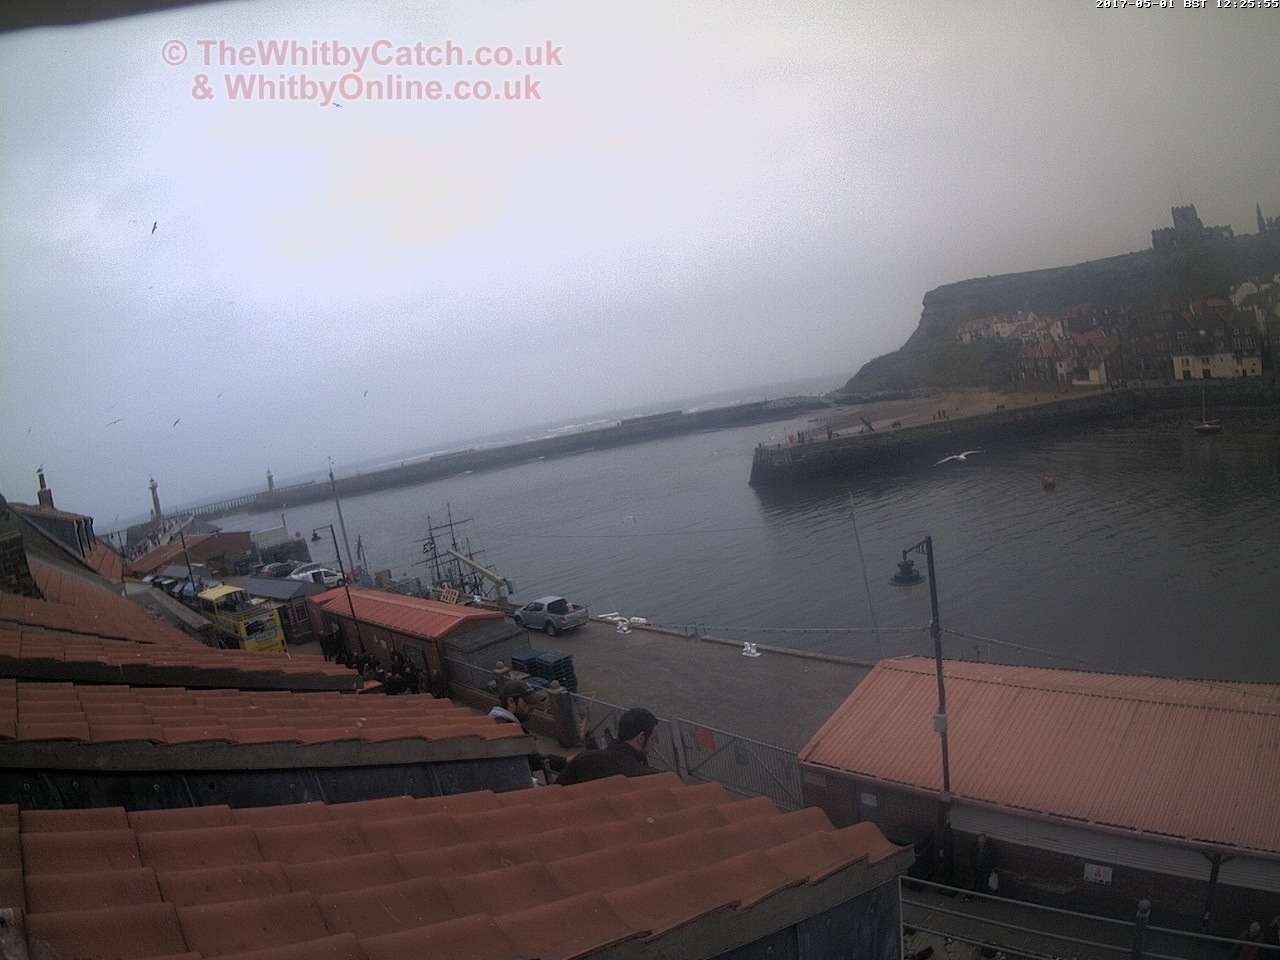 Whitby Mon 1st May 2017 12:26.